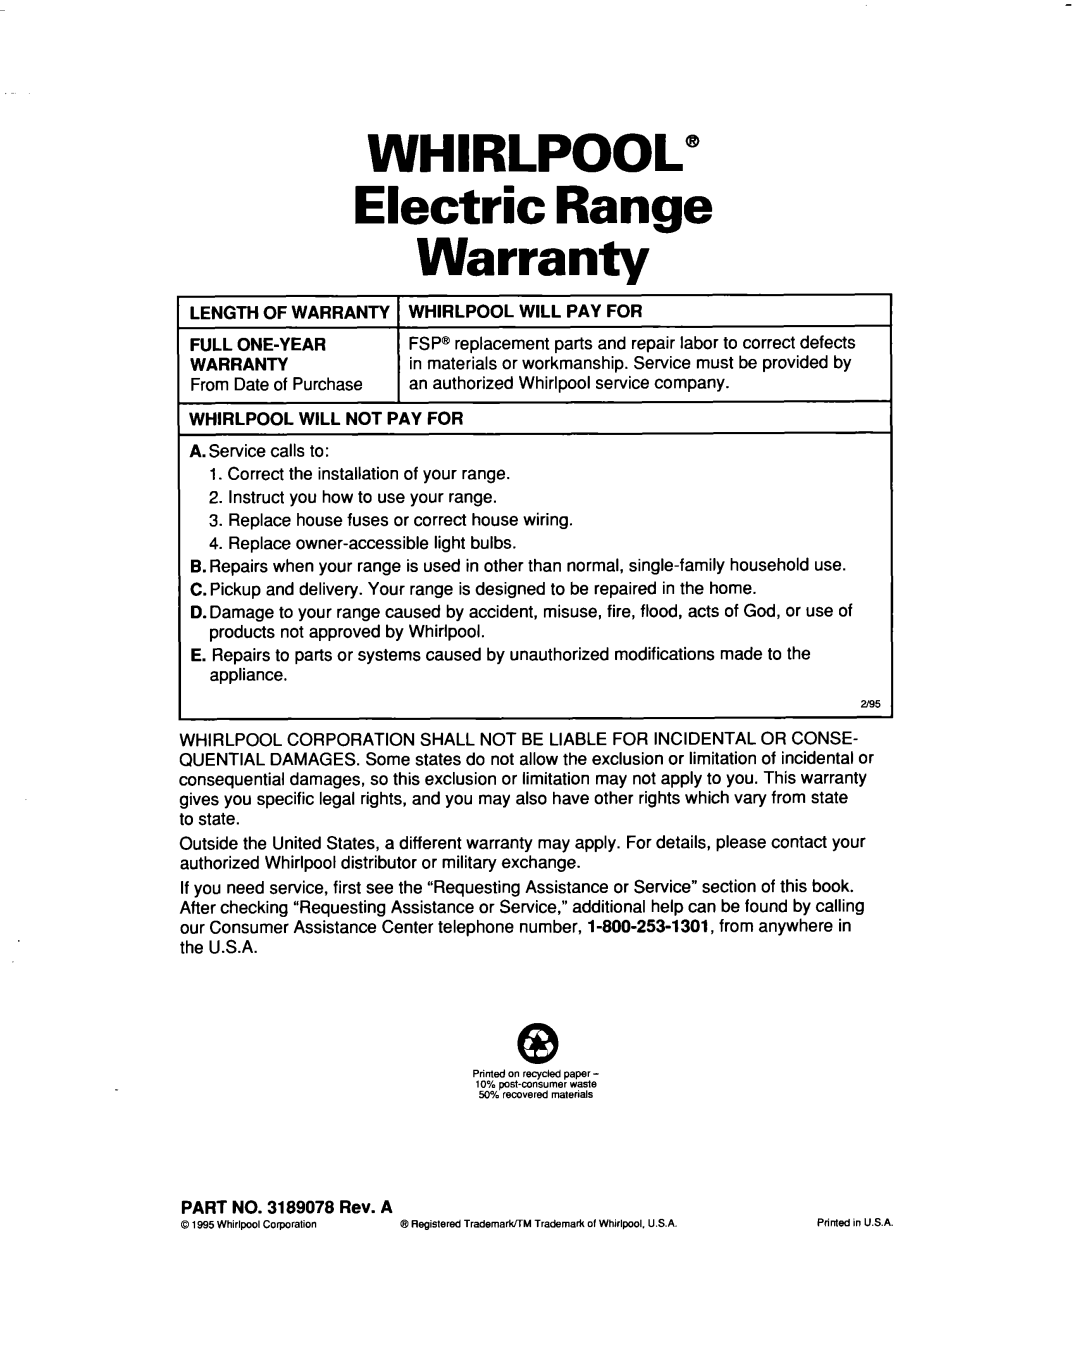 Whirlpool RF315PXD manual WHIRLPOOL” Electric Range Warranty, Length Of Warranty Whirlpool Will Pay For, Full One-Year 